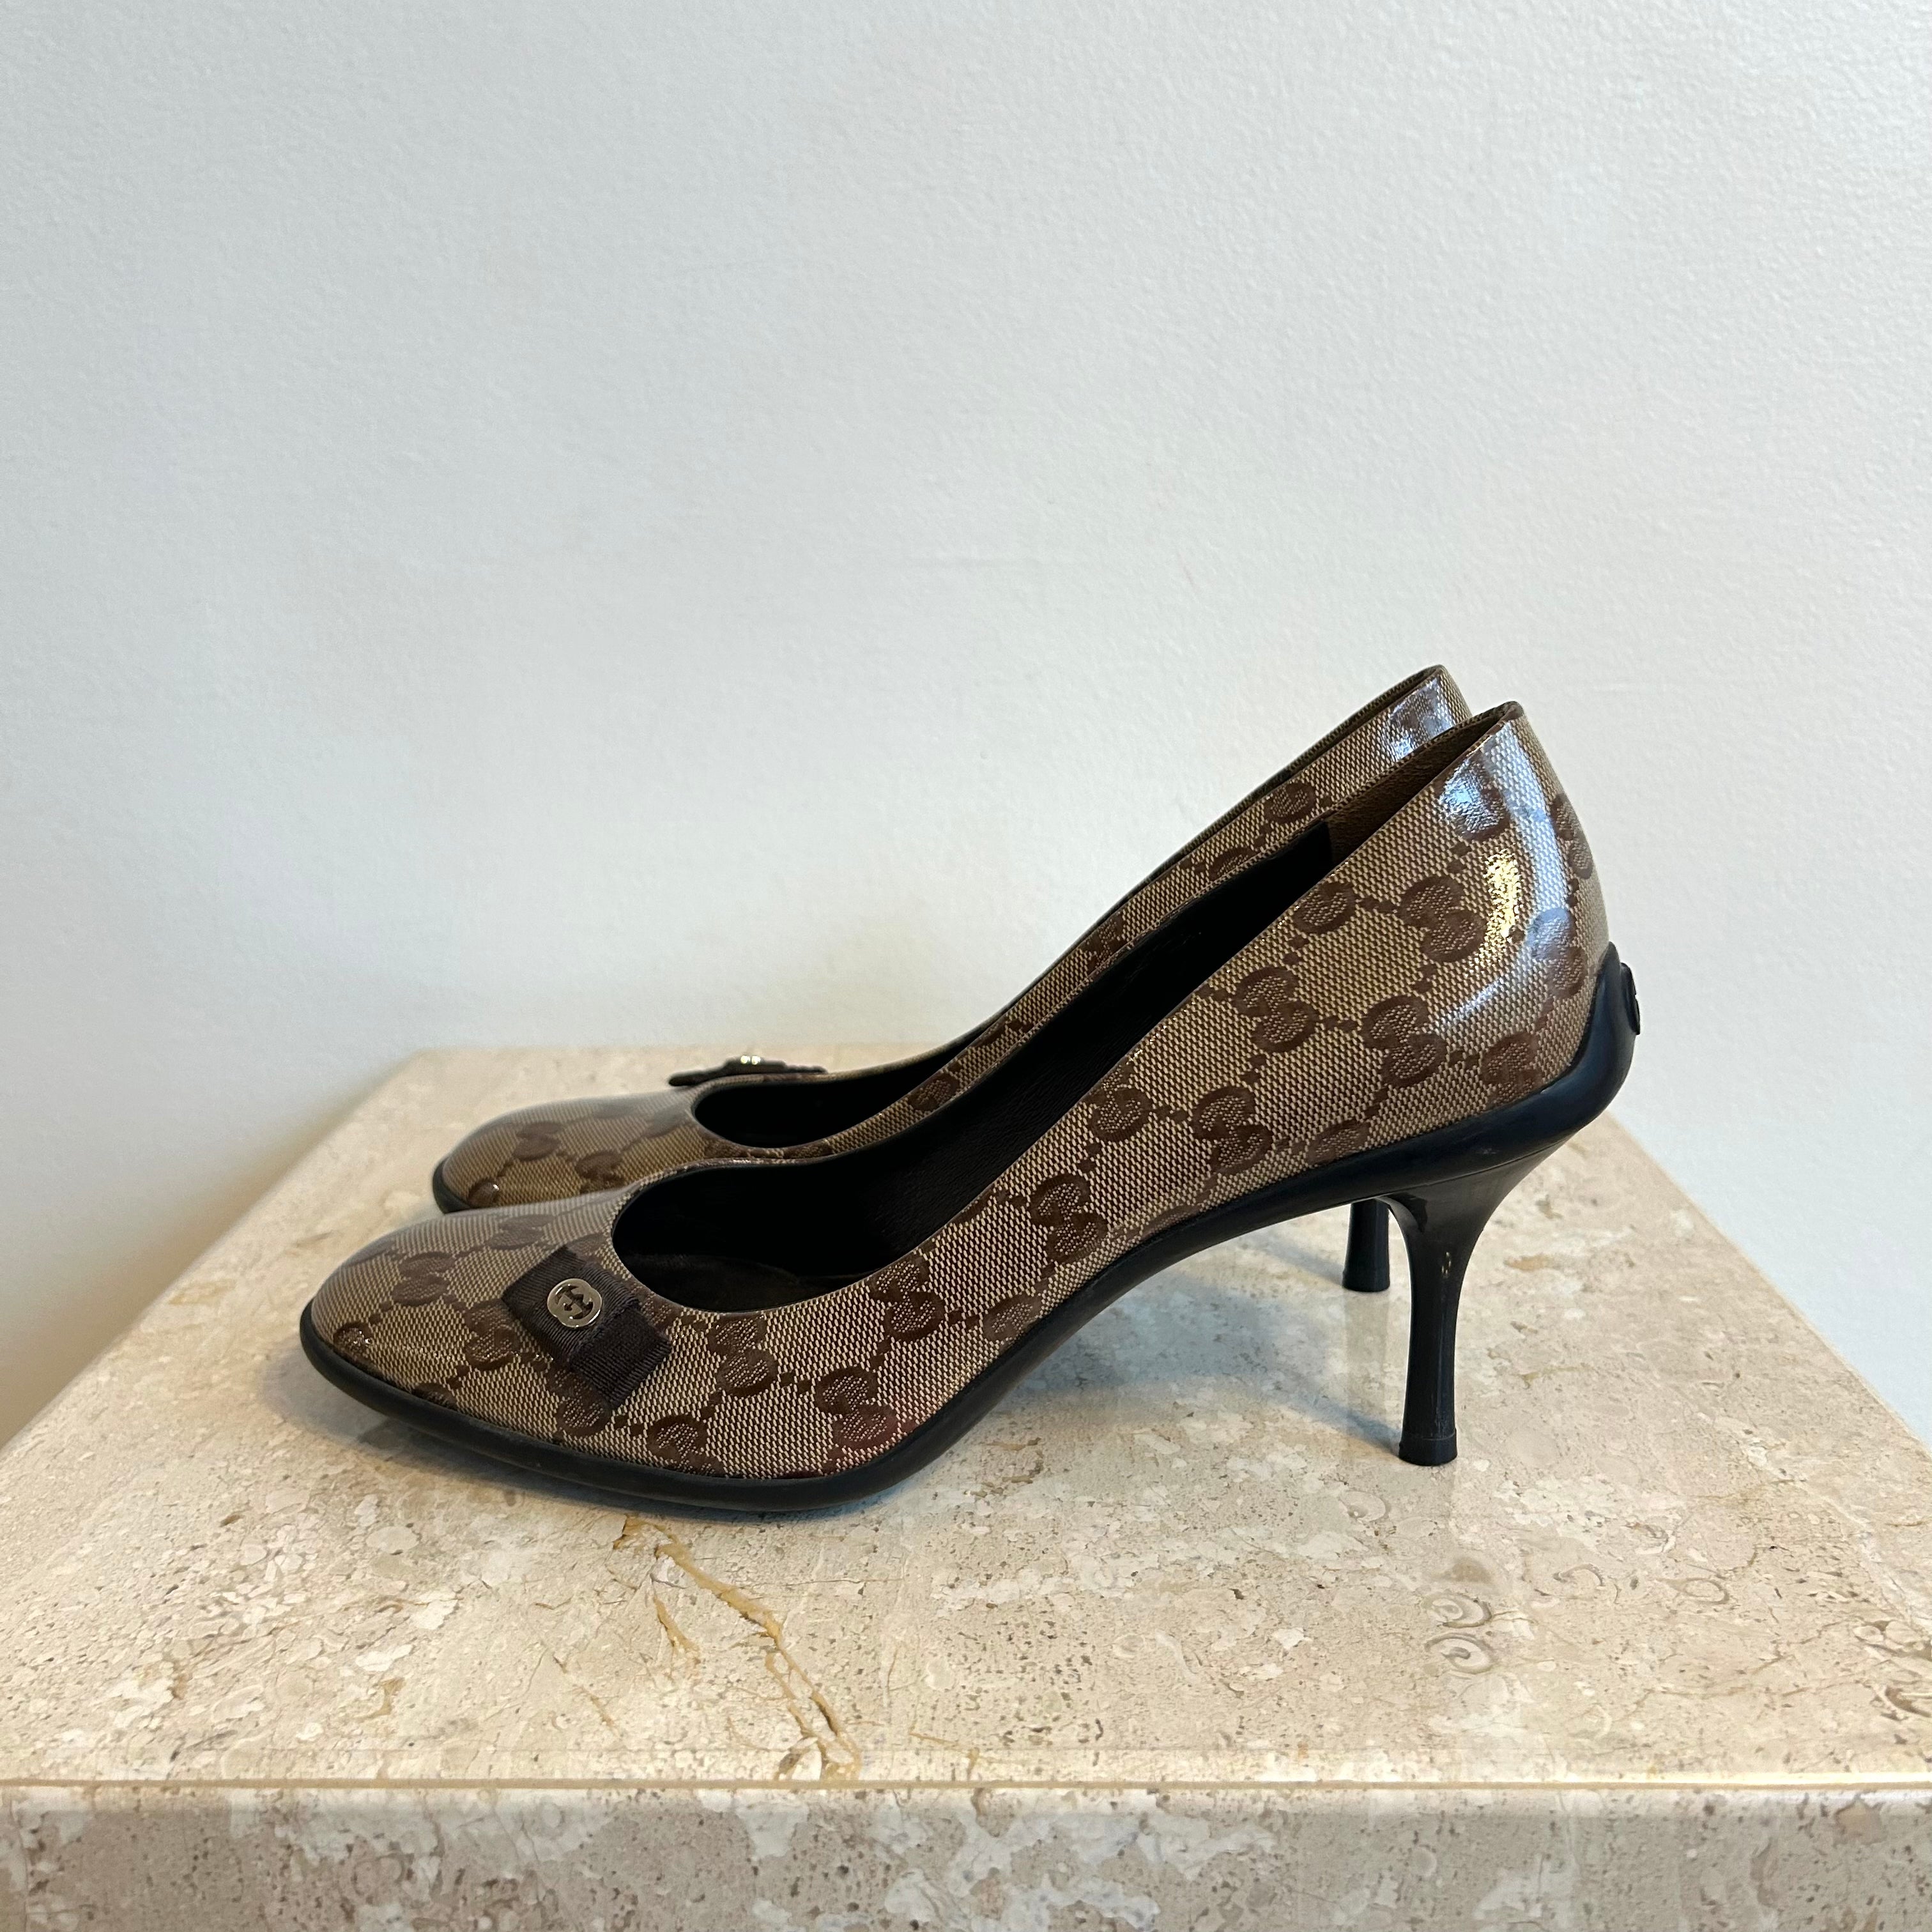 Pre-Owned GUCCI Crystal GG Bow Pumps - Size 39